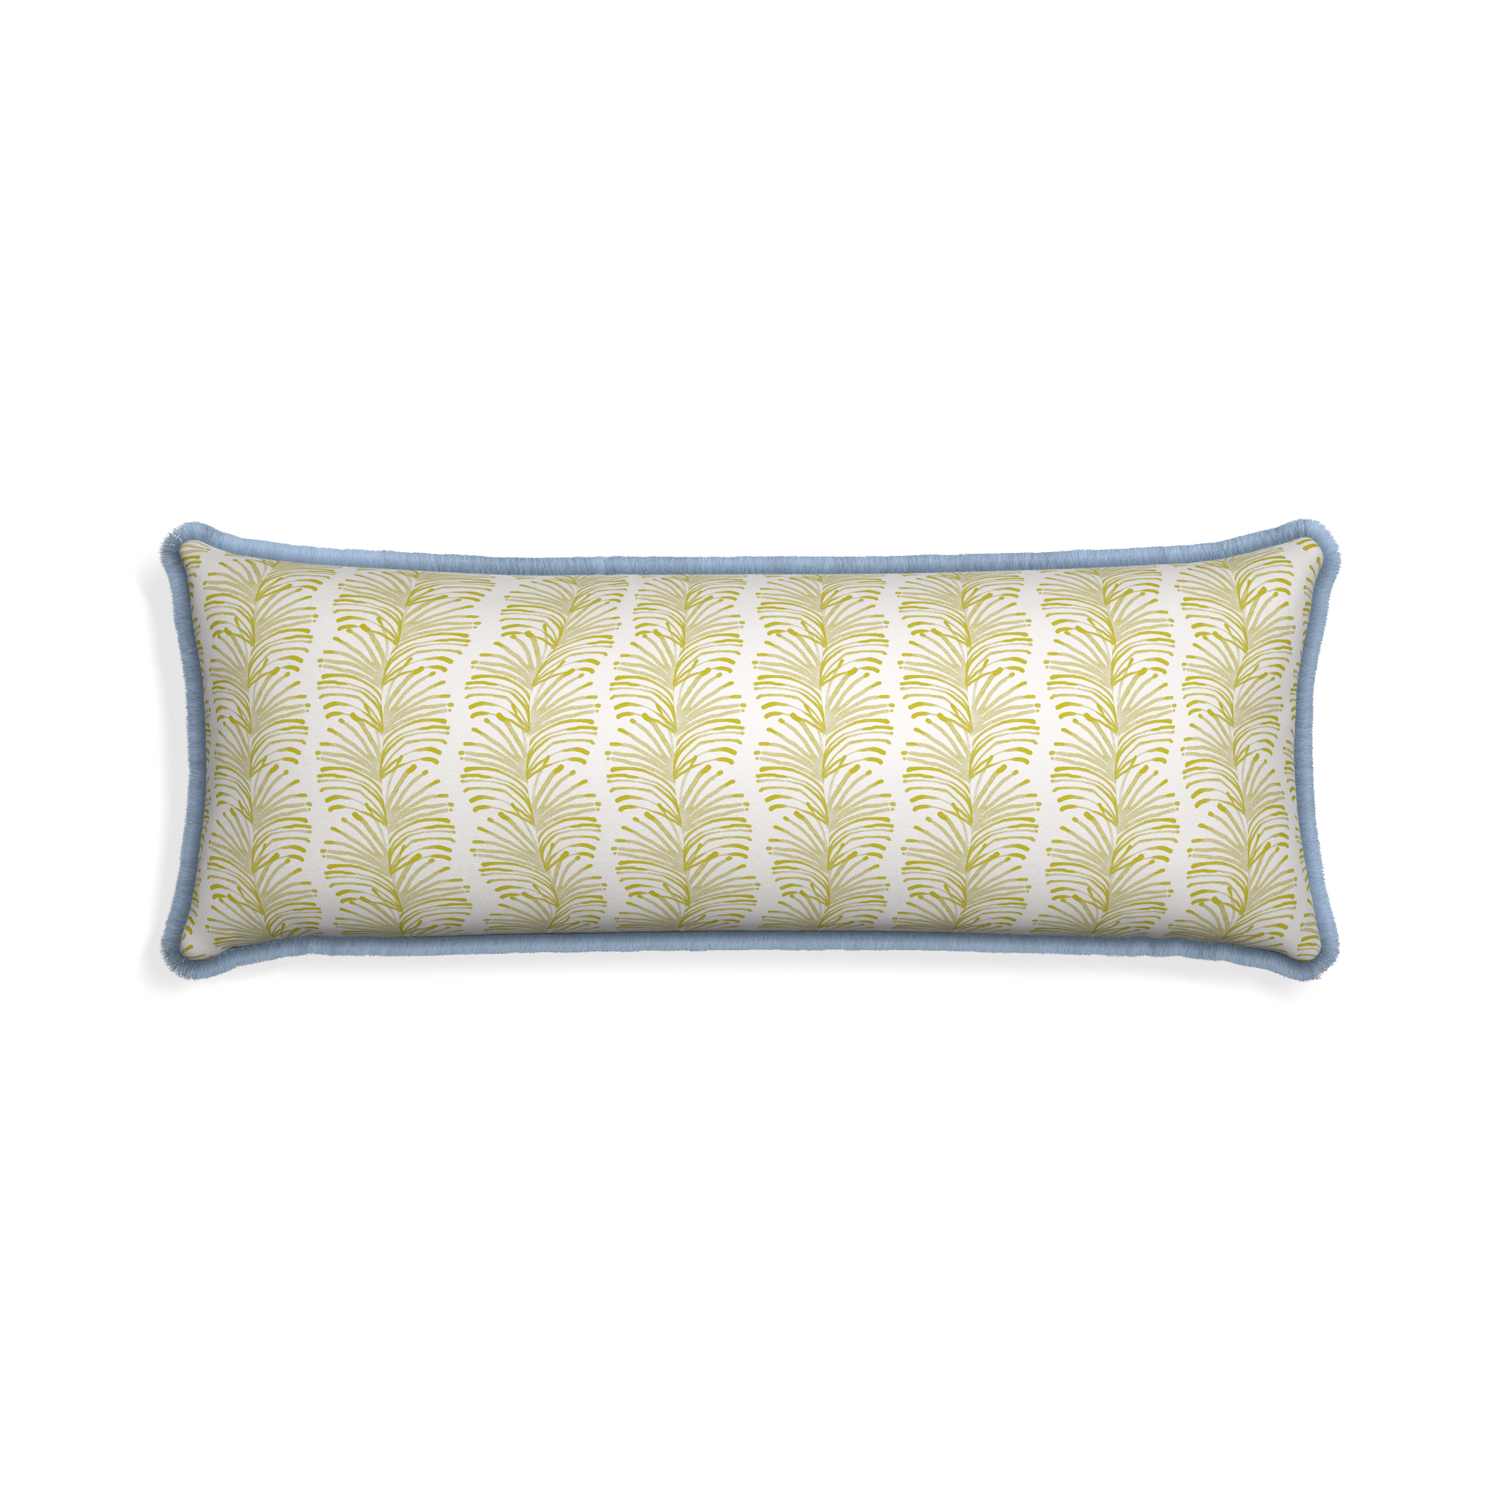 Xl-lumbar emma chartreuse custom yellow stripe chartreusepillow with sky fringe on white background